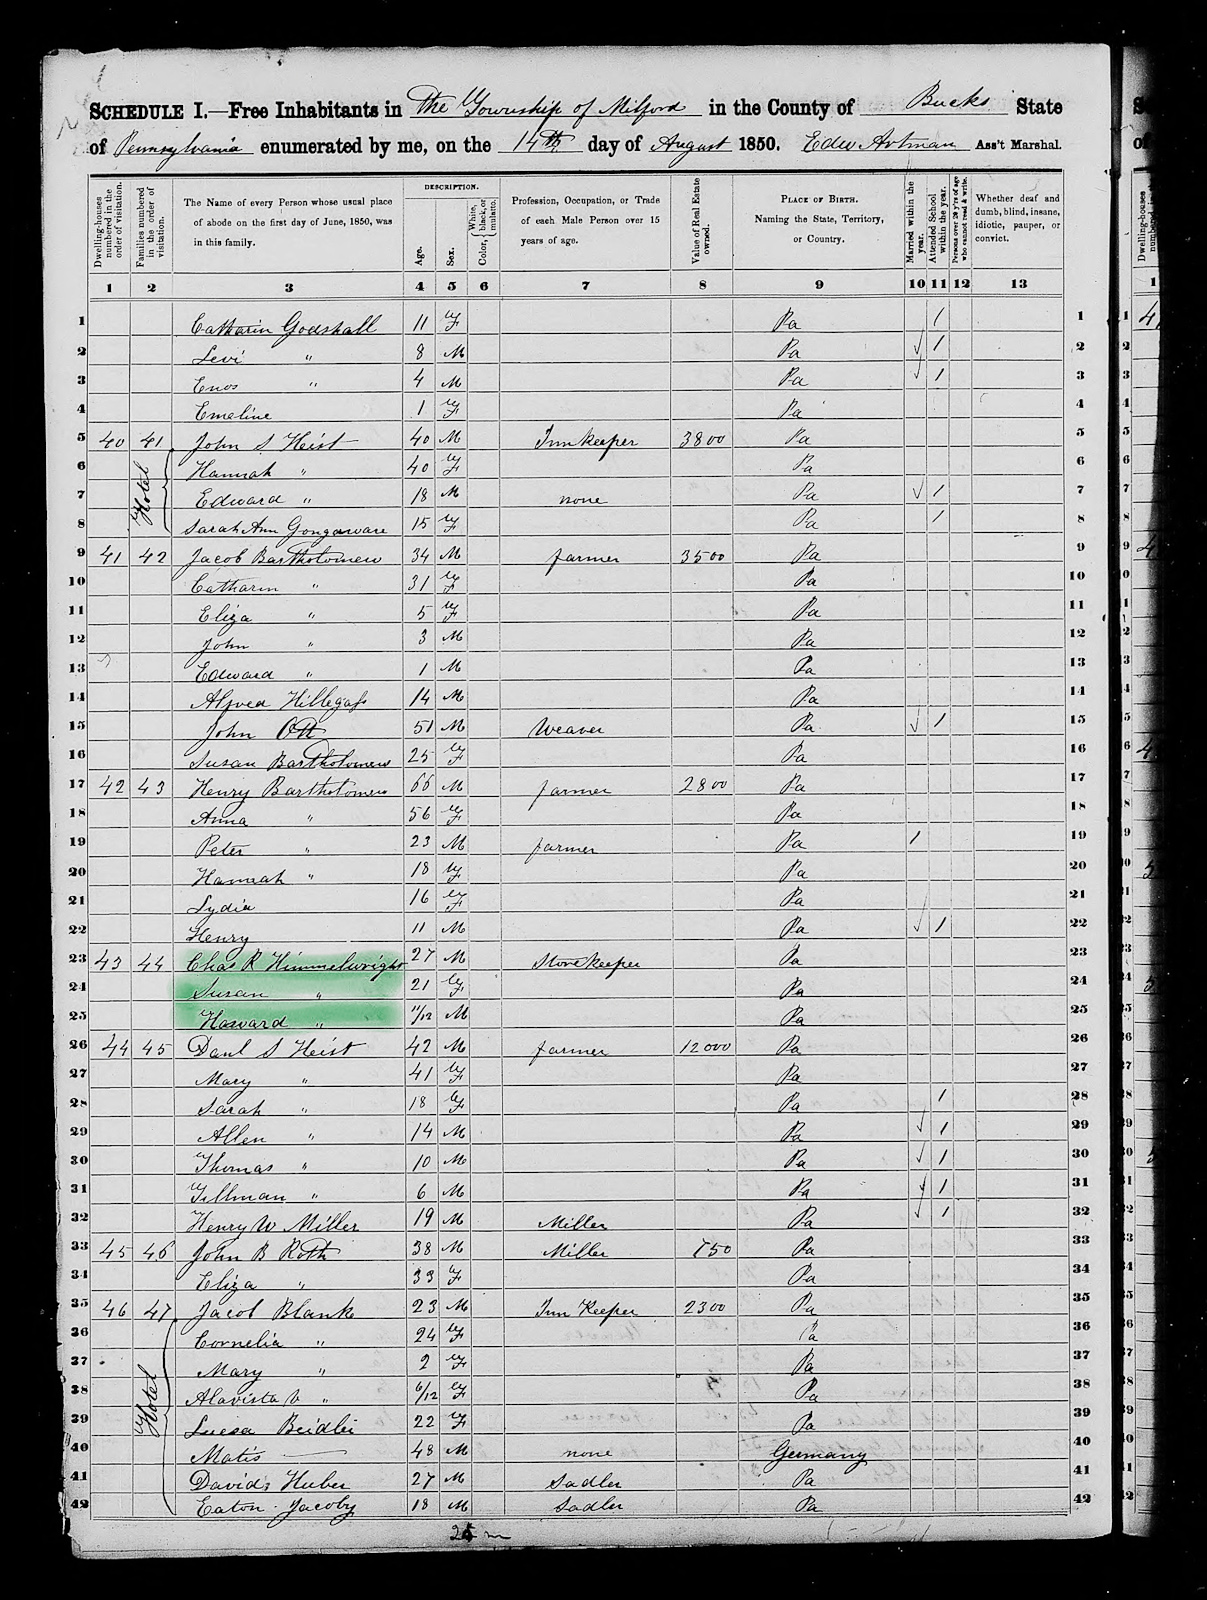 Census Himmelwright - 1850 United States Federal Census